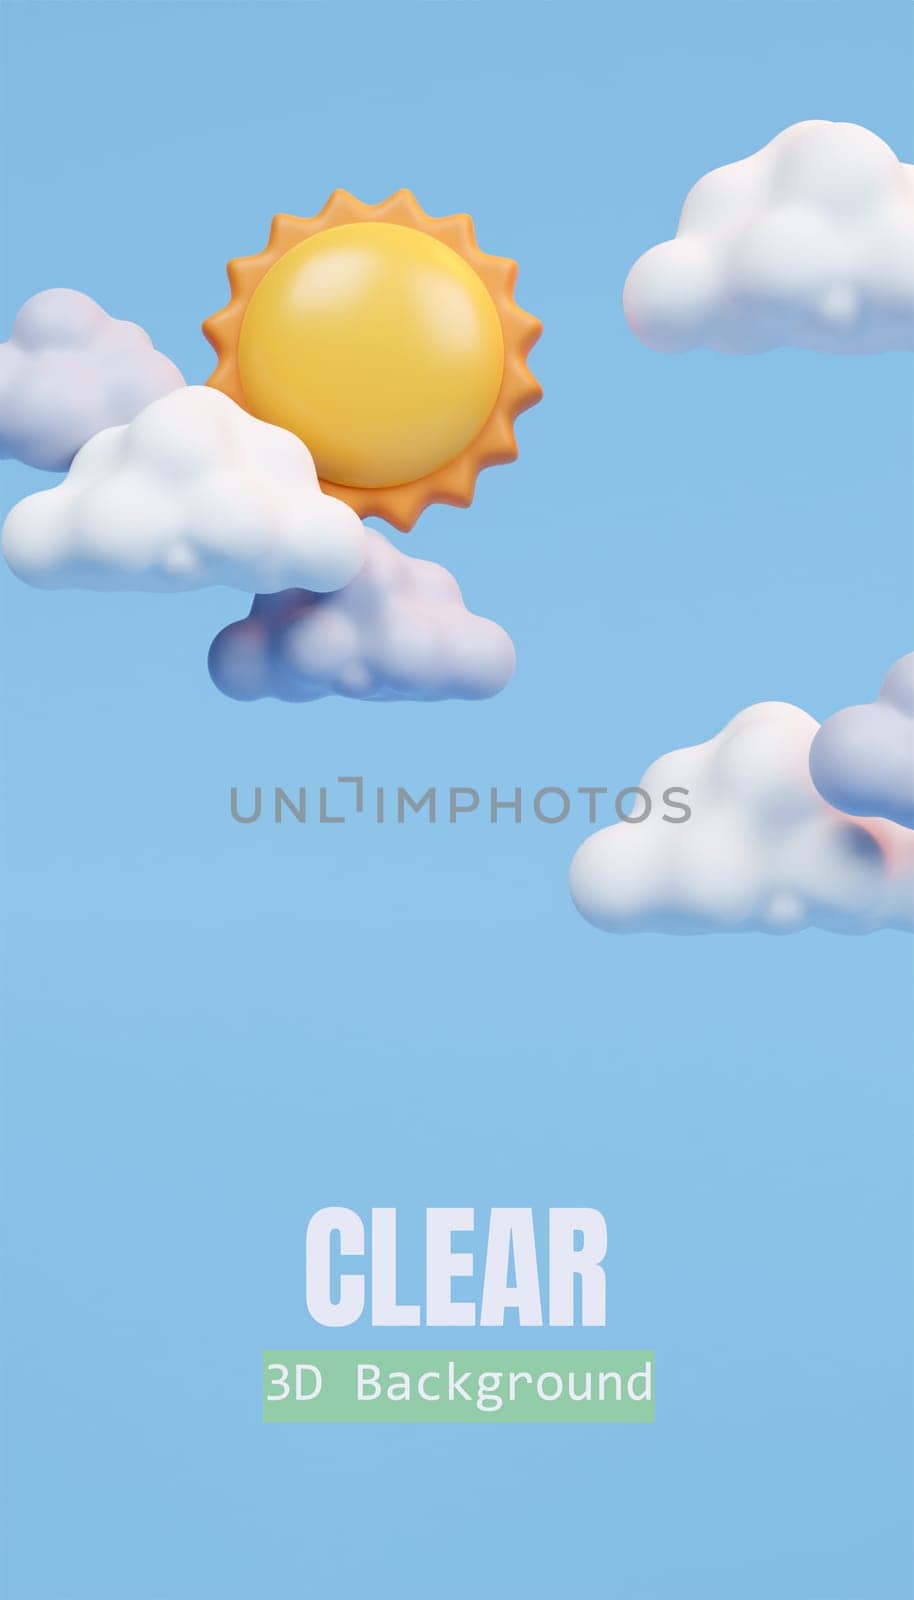 3d Weather forecast. Cloudy with sun. Meteorological. 3d rendering illustration. by meepiangraphic